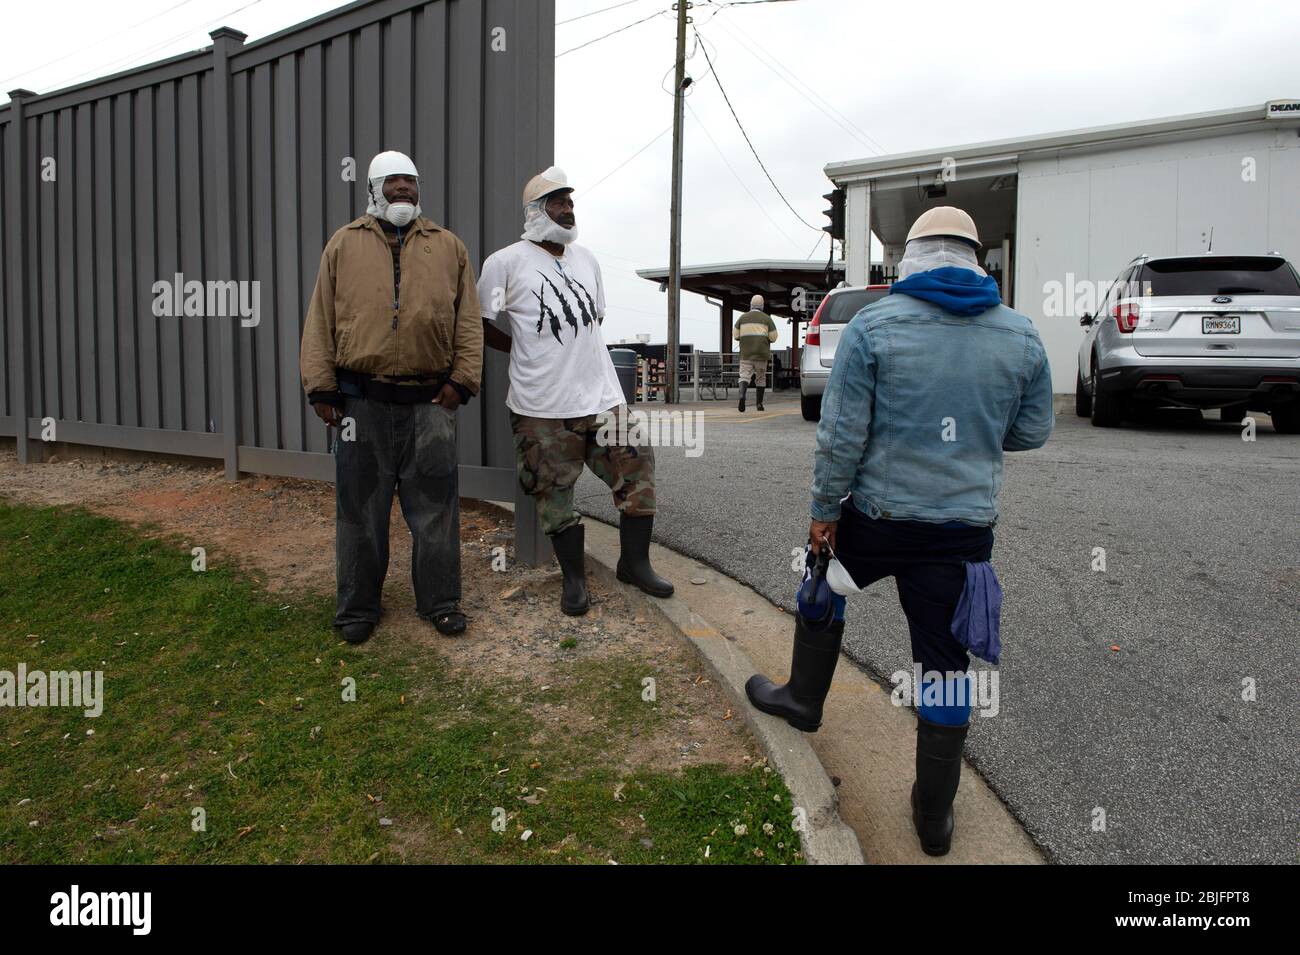 Marietta, GA, USA. 29th Apr, 2020. Employees of the Tip Top Poultry processing facility take a break from their jobs Ã”hanging chicken.Ã The company was thought to be responsible for listeria-contaminated chicken, which resulted in multiple product recalls in the U.S. and Canada in 2019. Credit: Robin Rayne/ZUMA Wire/Alamy Live News Stock Photo